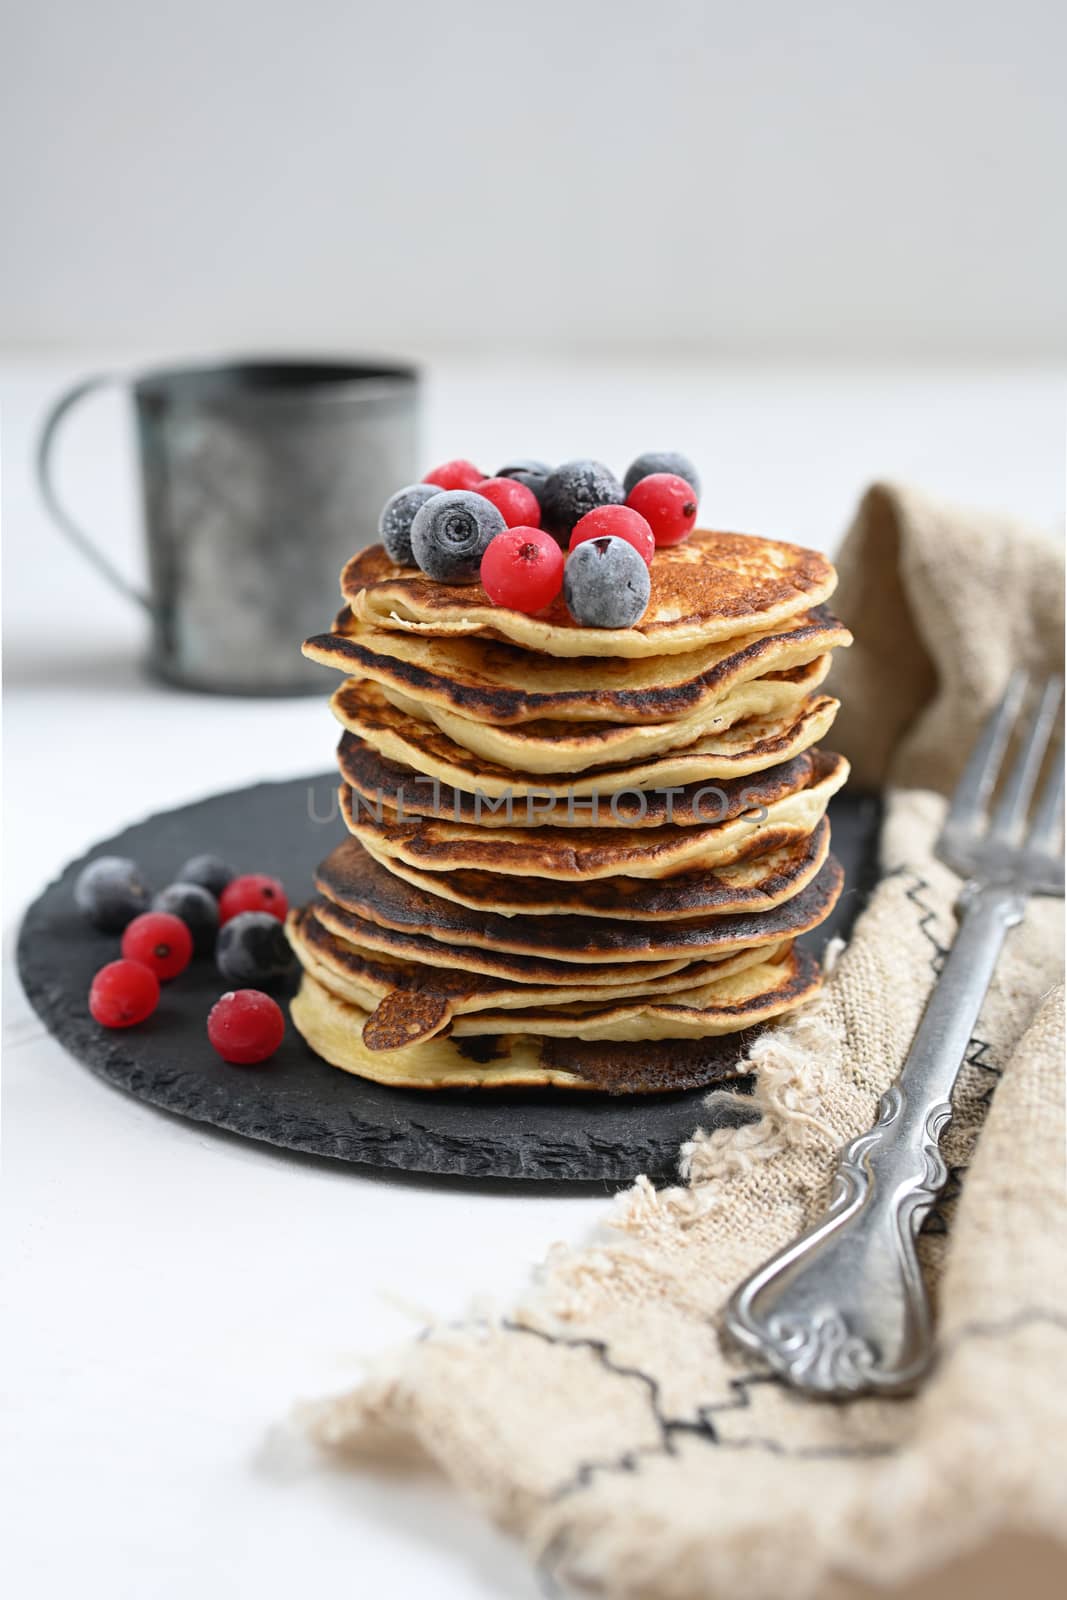 Plate with pancakes and berries on white table.